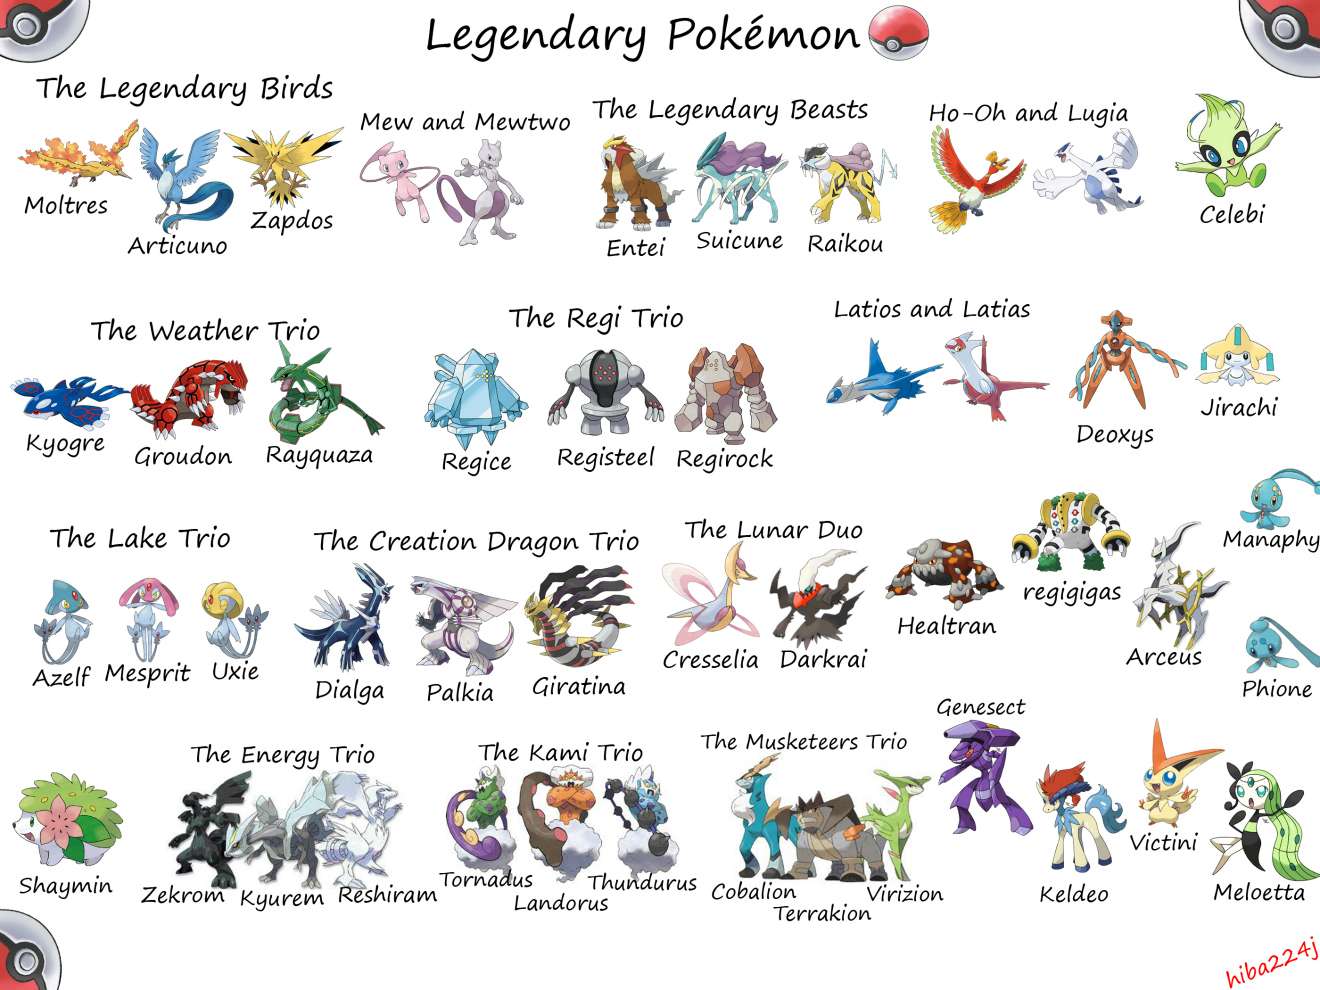 Poll: How many legendaries is too much in a pokemon team?